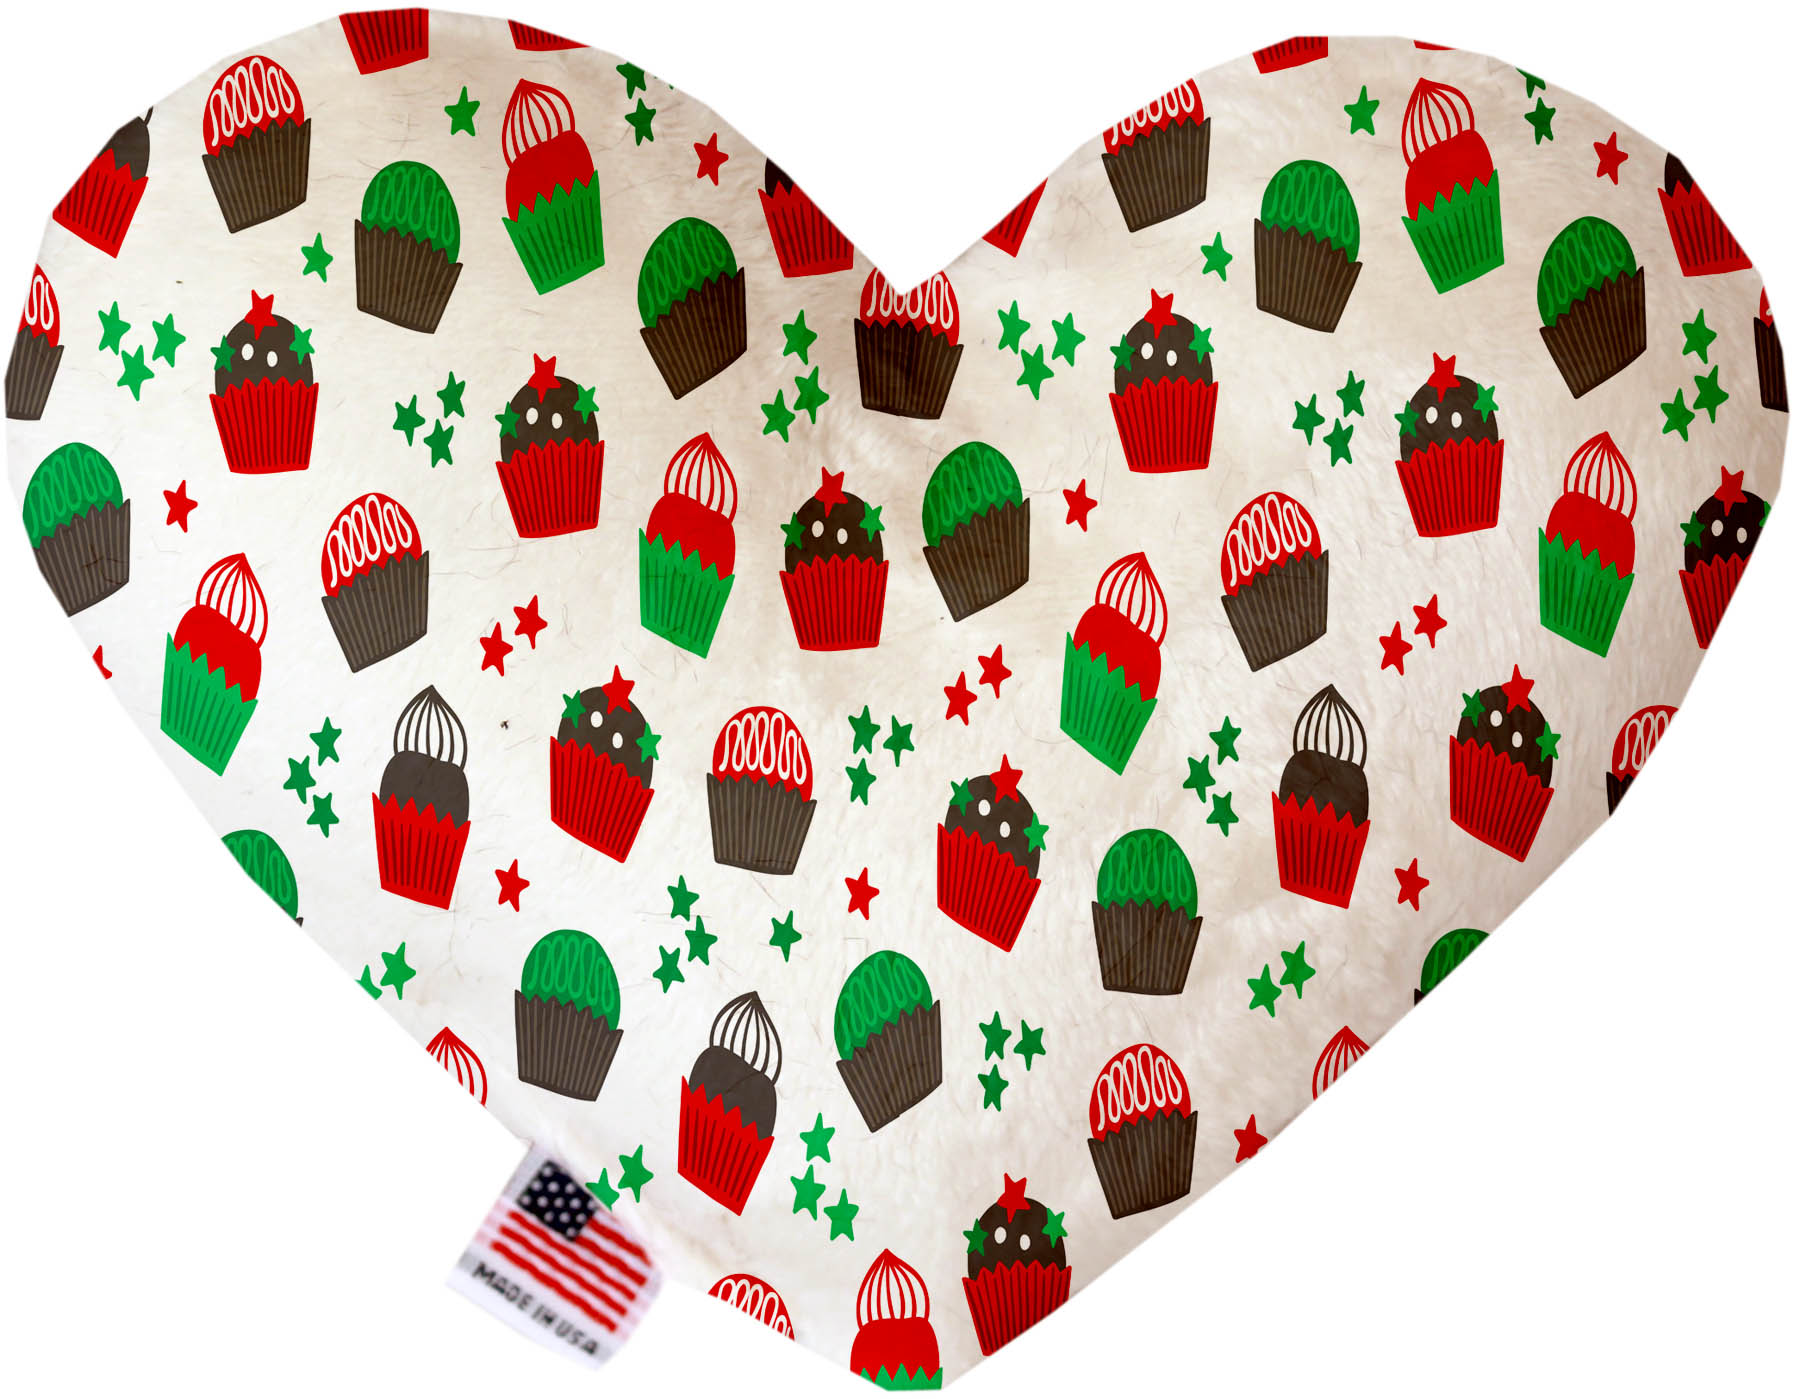 Christmas Cupcakes 8 Inch Heart Dog Toy